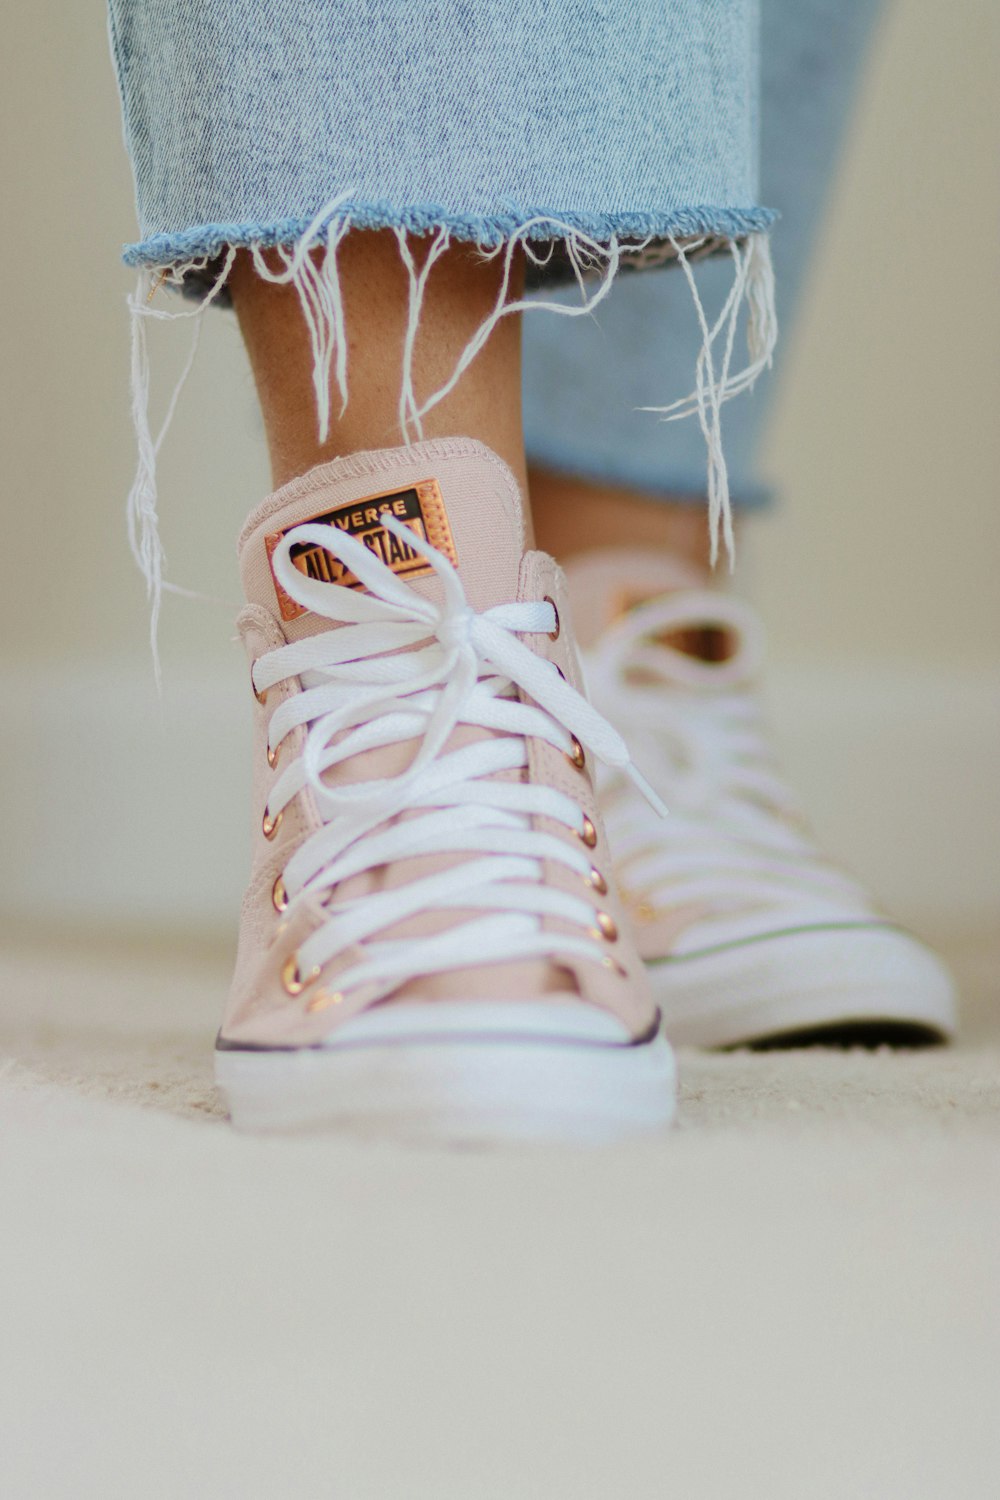 a close up of a person's feet wearing pink and white sneakers